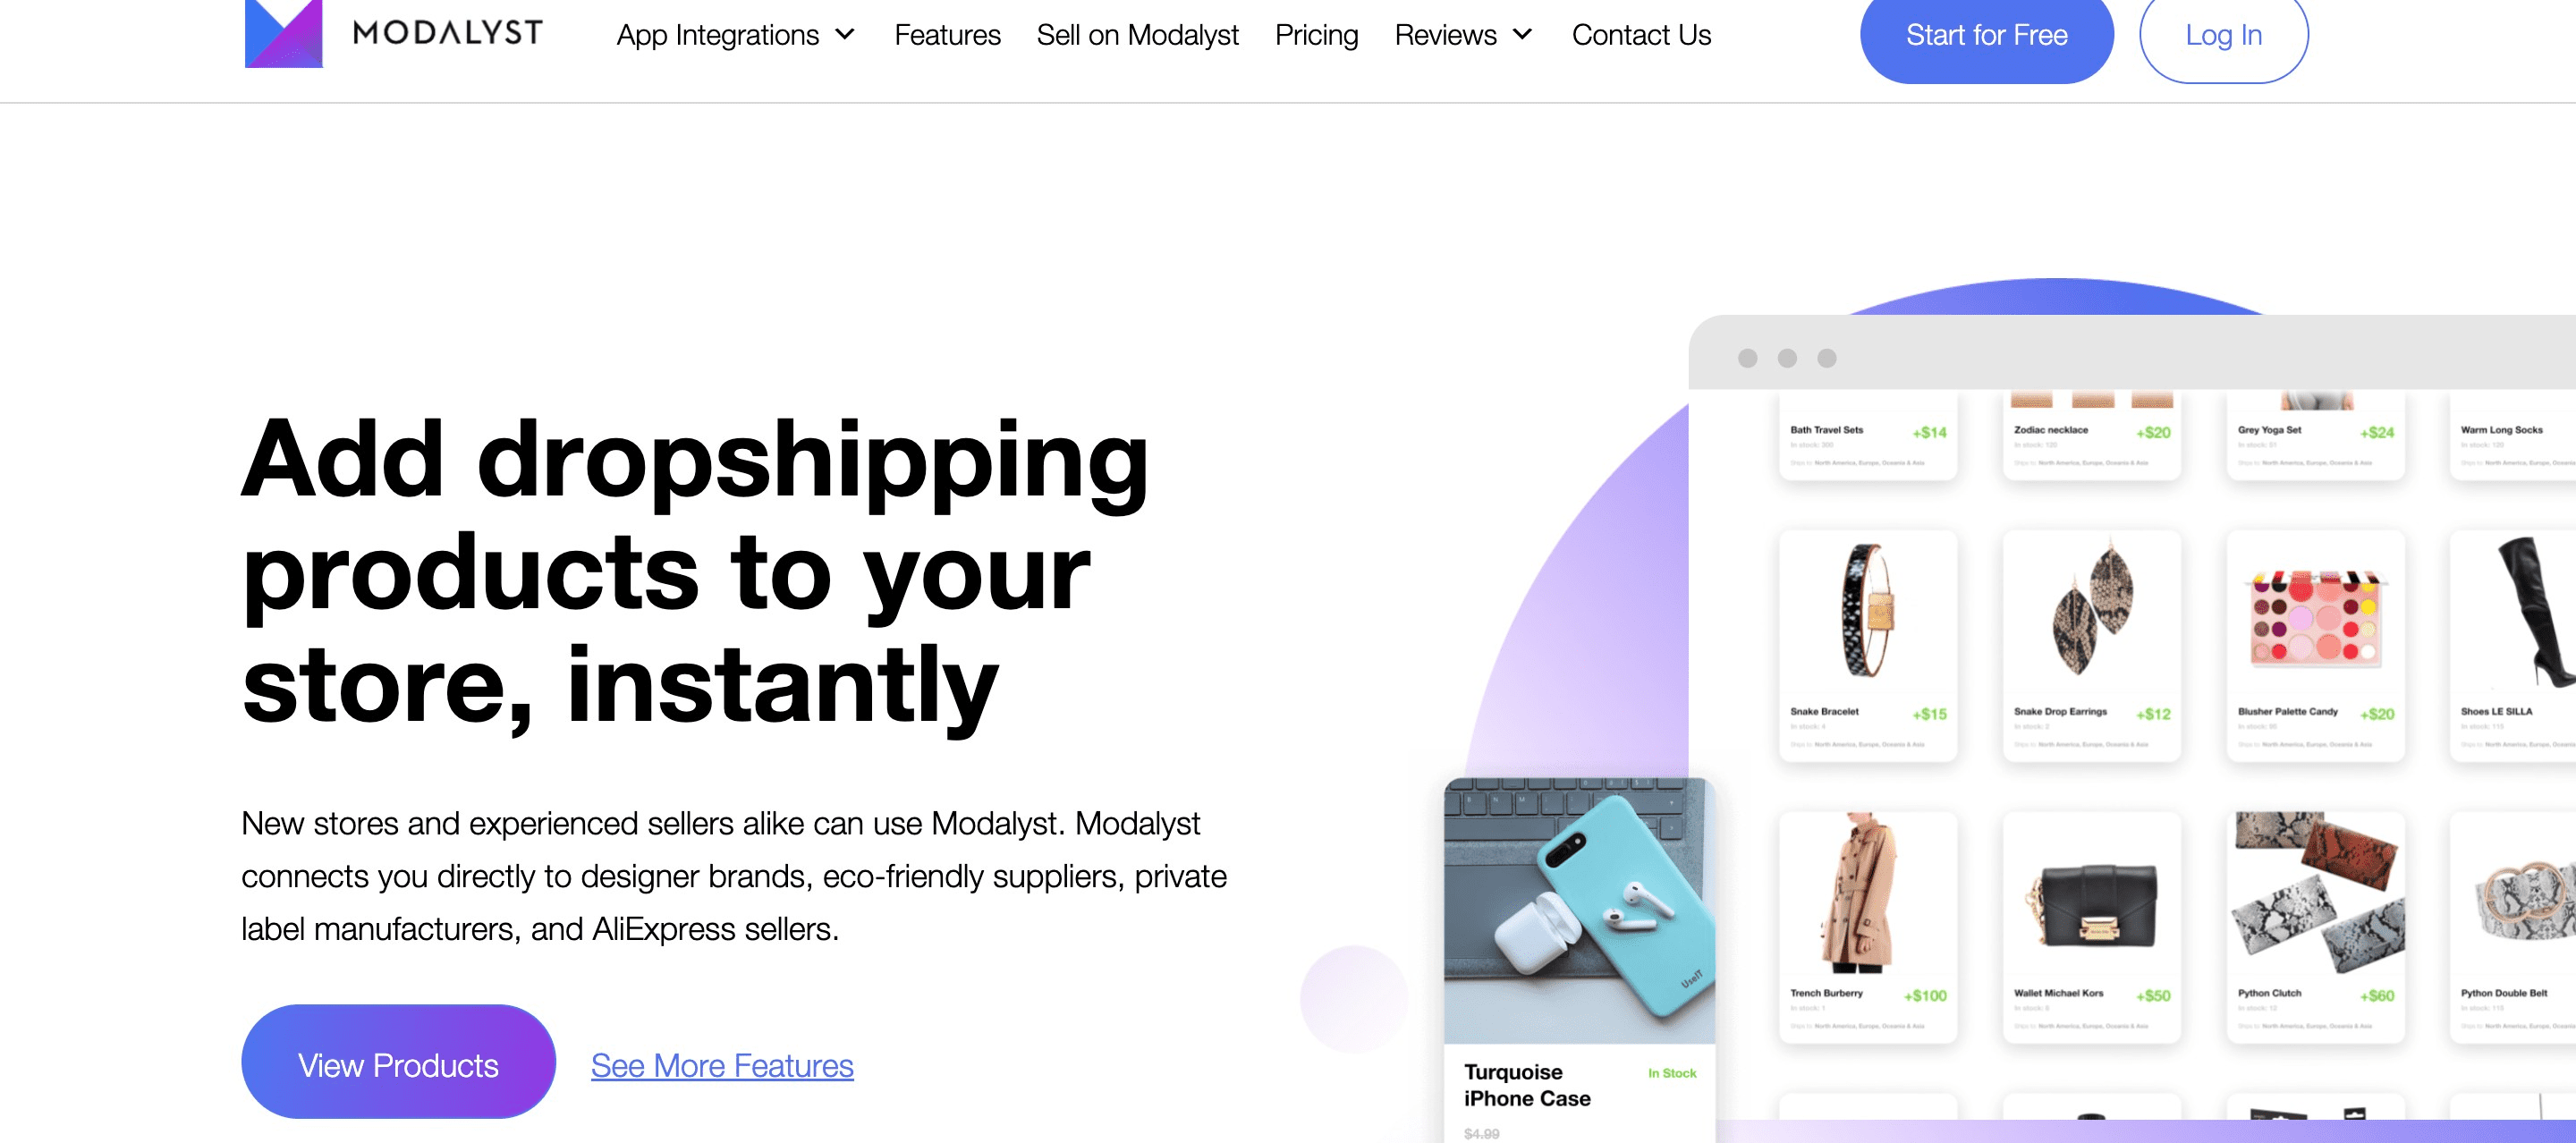 Shopify Dropshipping Suppliers: Modalyst